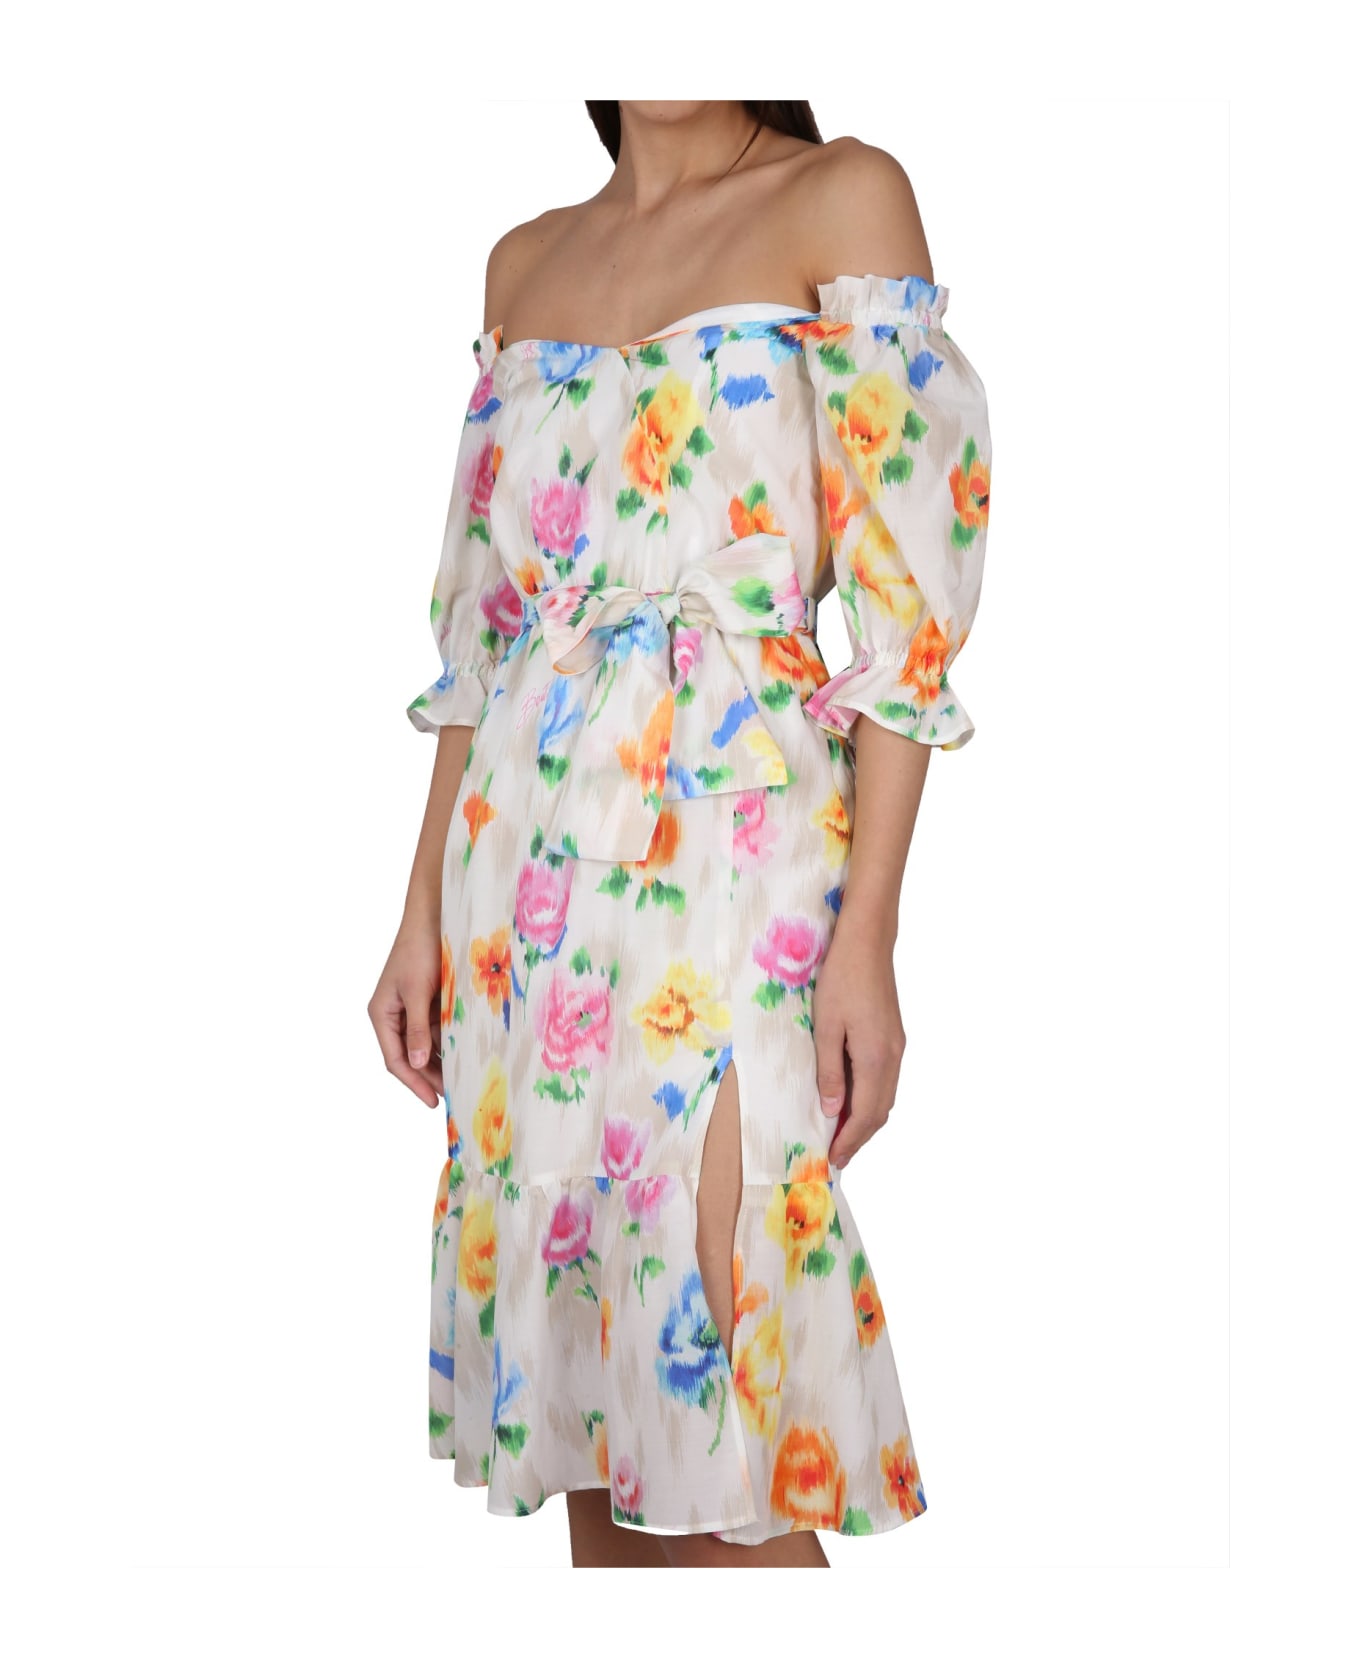 Boutique Moschino Dress With Floral Pattern - MULTICOLOR